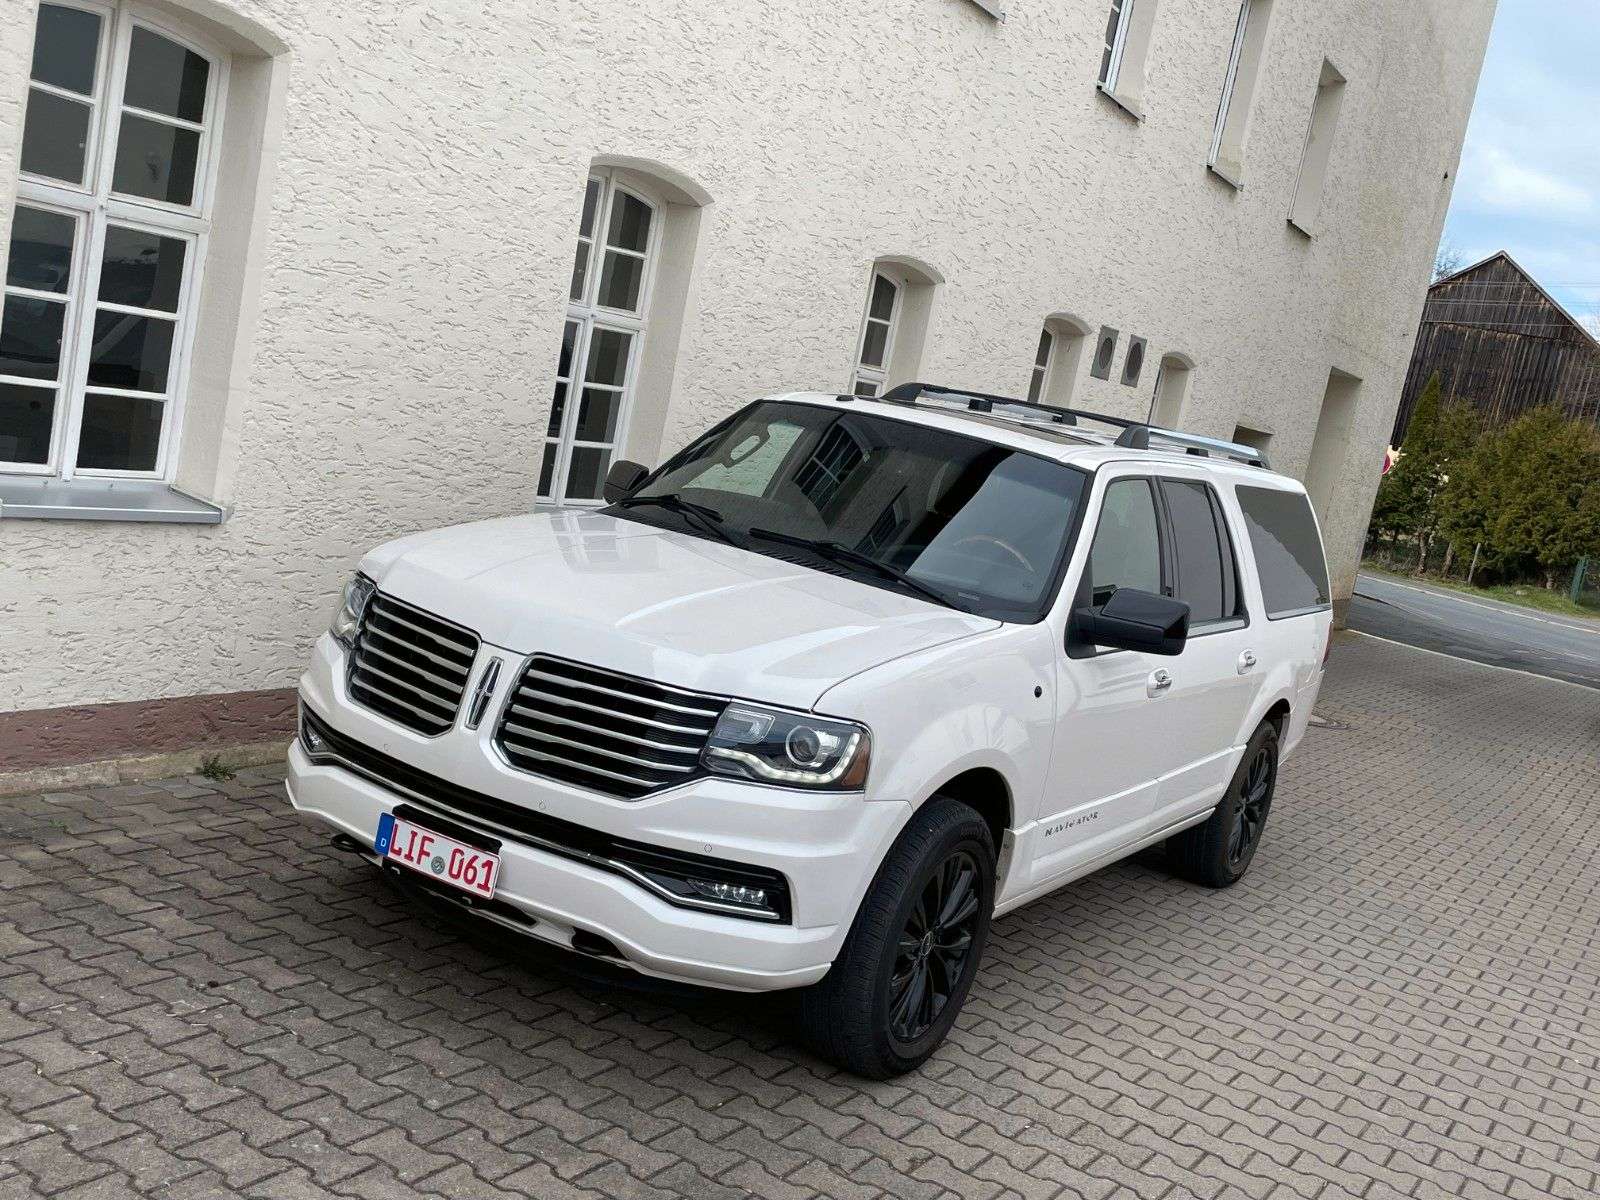 Lincoln Navigator Off-Road/Pick-up in White used in Altenkunstadt for € 42,900.-